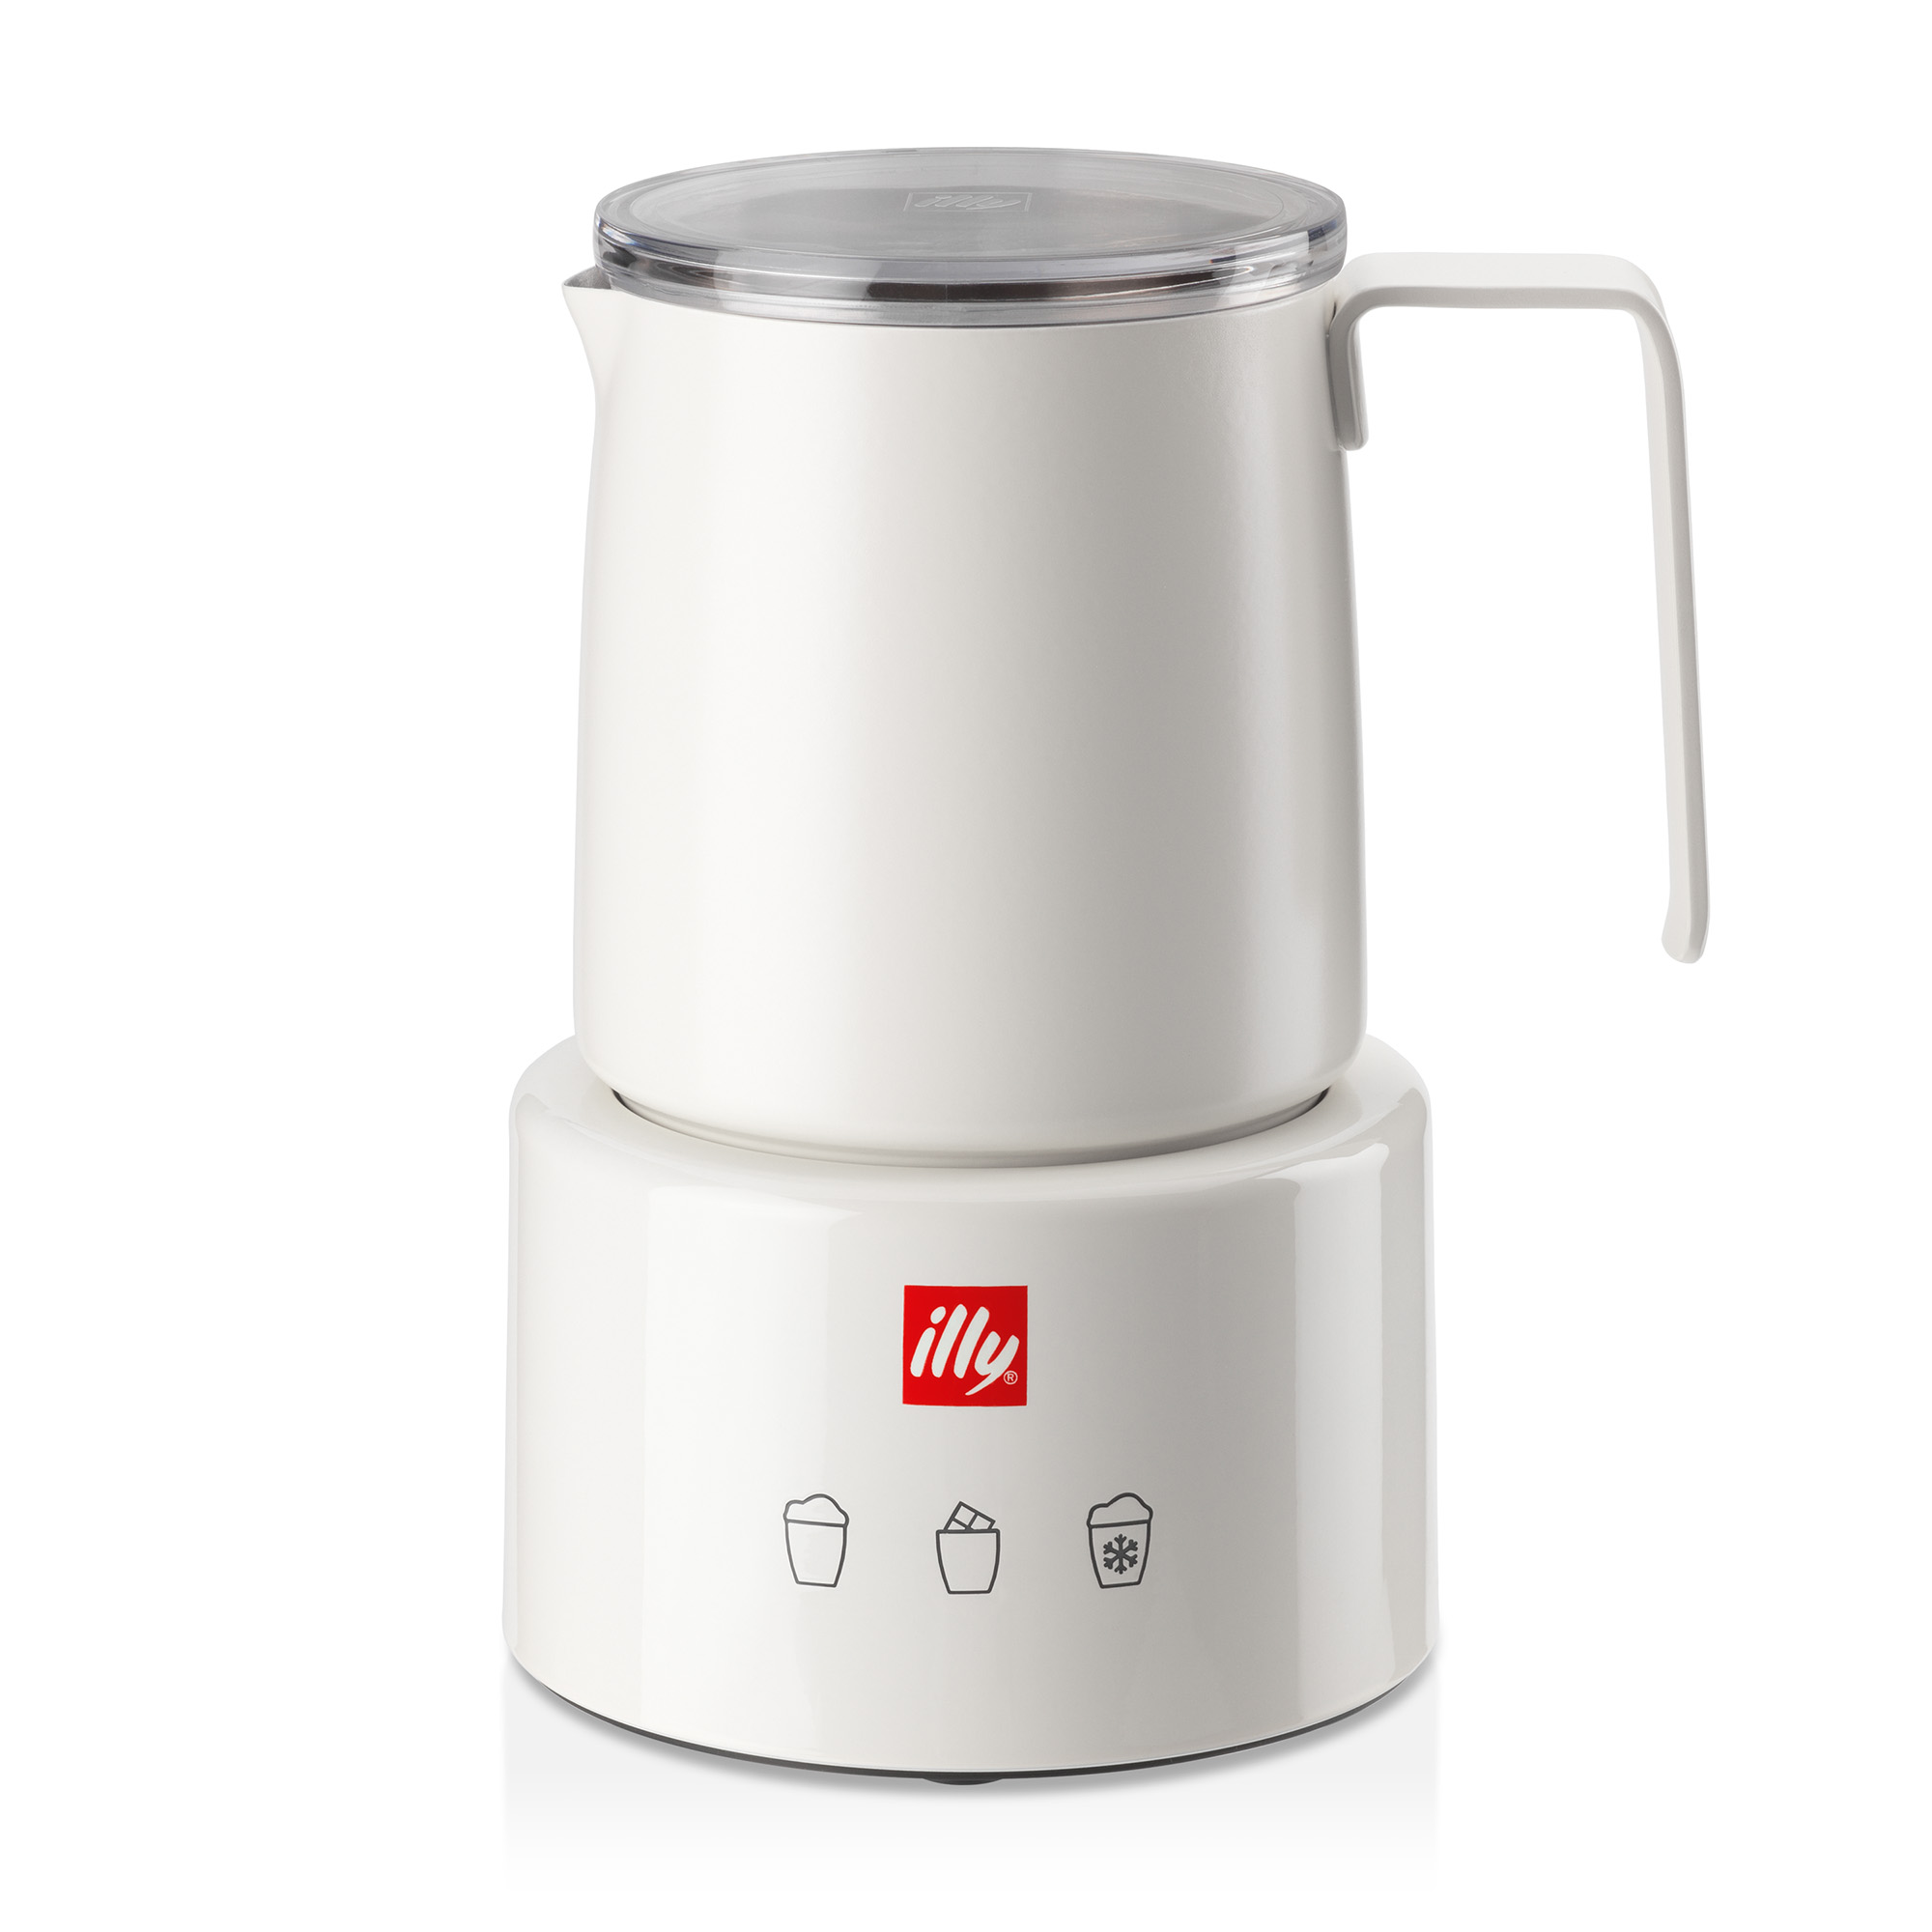 https://www.illy.com/on/demandware.static/-/Sites-masterCatalog_illycaffe/default/dw21437188/products/Cups/Accessories/22984_coffee-machines_accessories_milk-frother_illy-shop/2020_MillFrother_front_handle.jpg